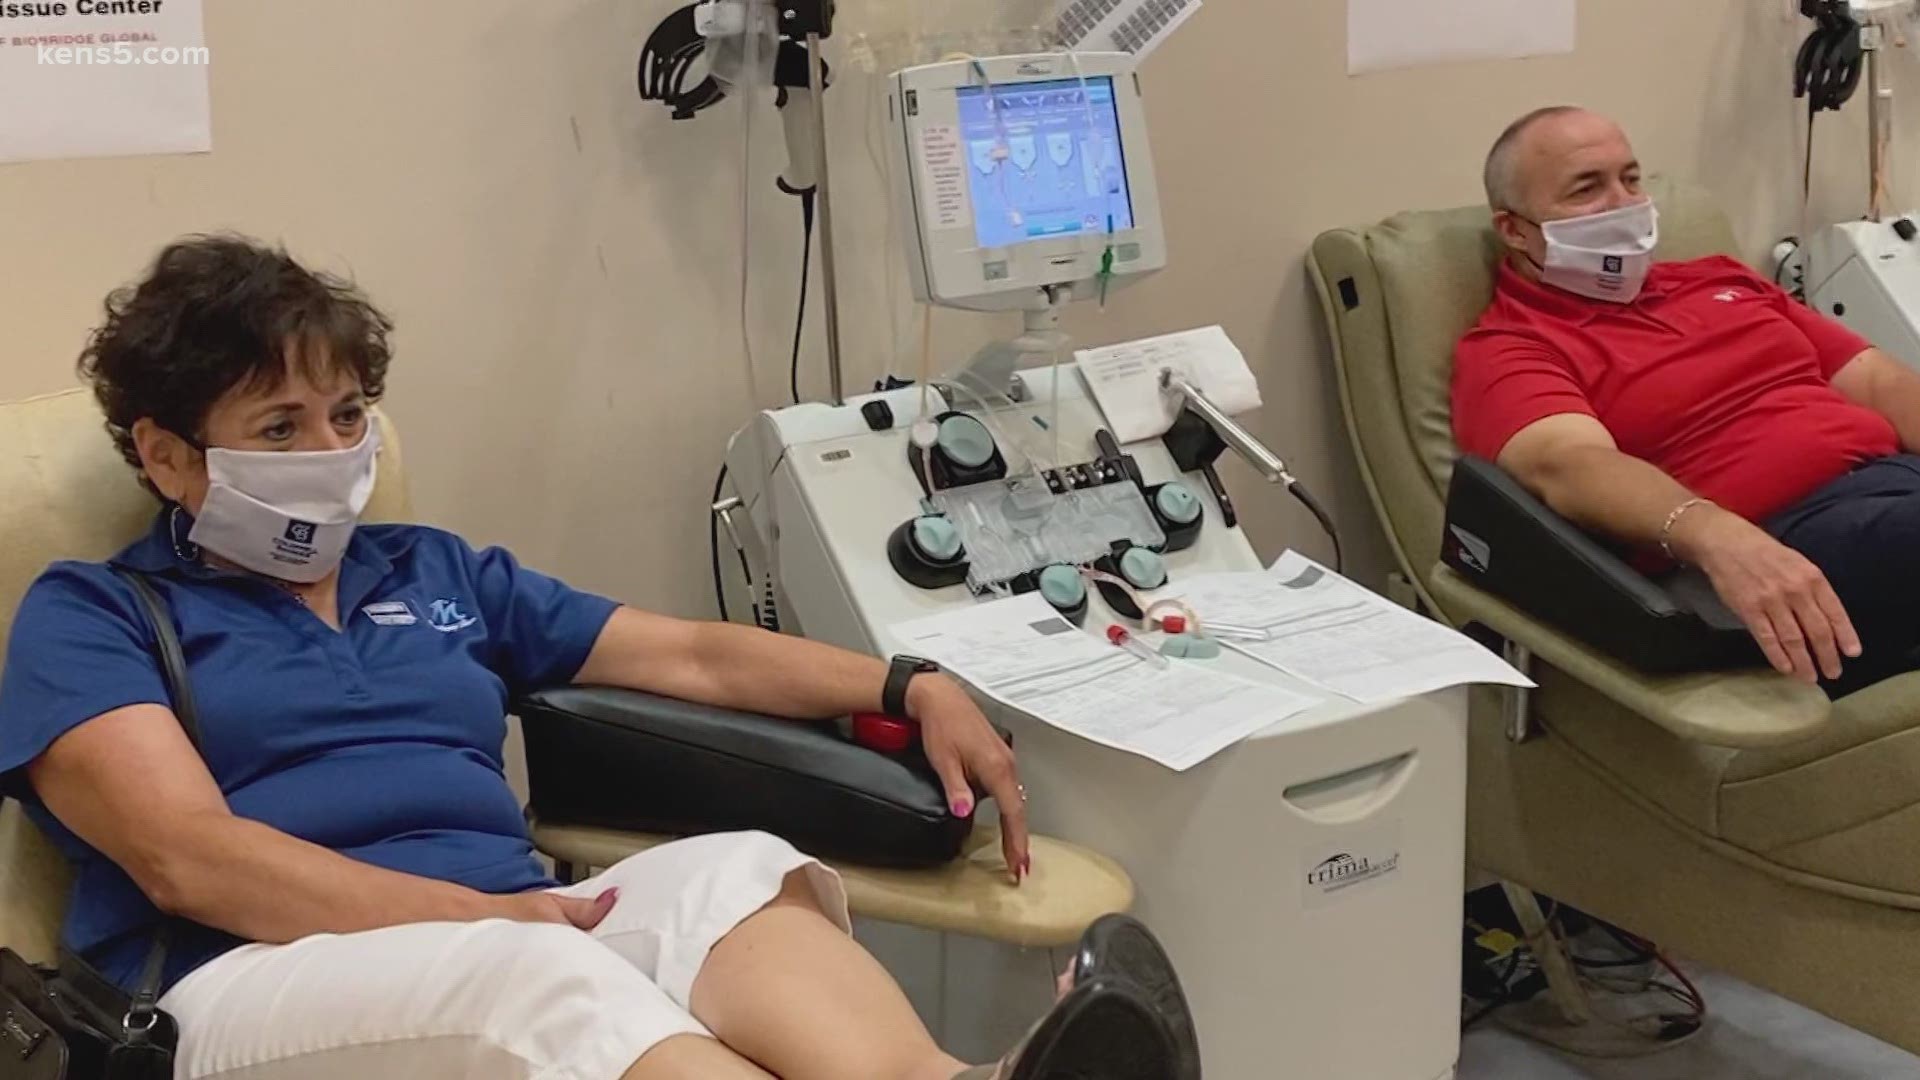 The South Texas Blood and Tissue Center is urging those who have recovered from COVID-19 to consider donating convalescent blood plasma ahead of getting immunized.